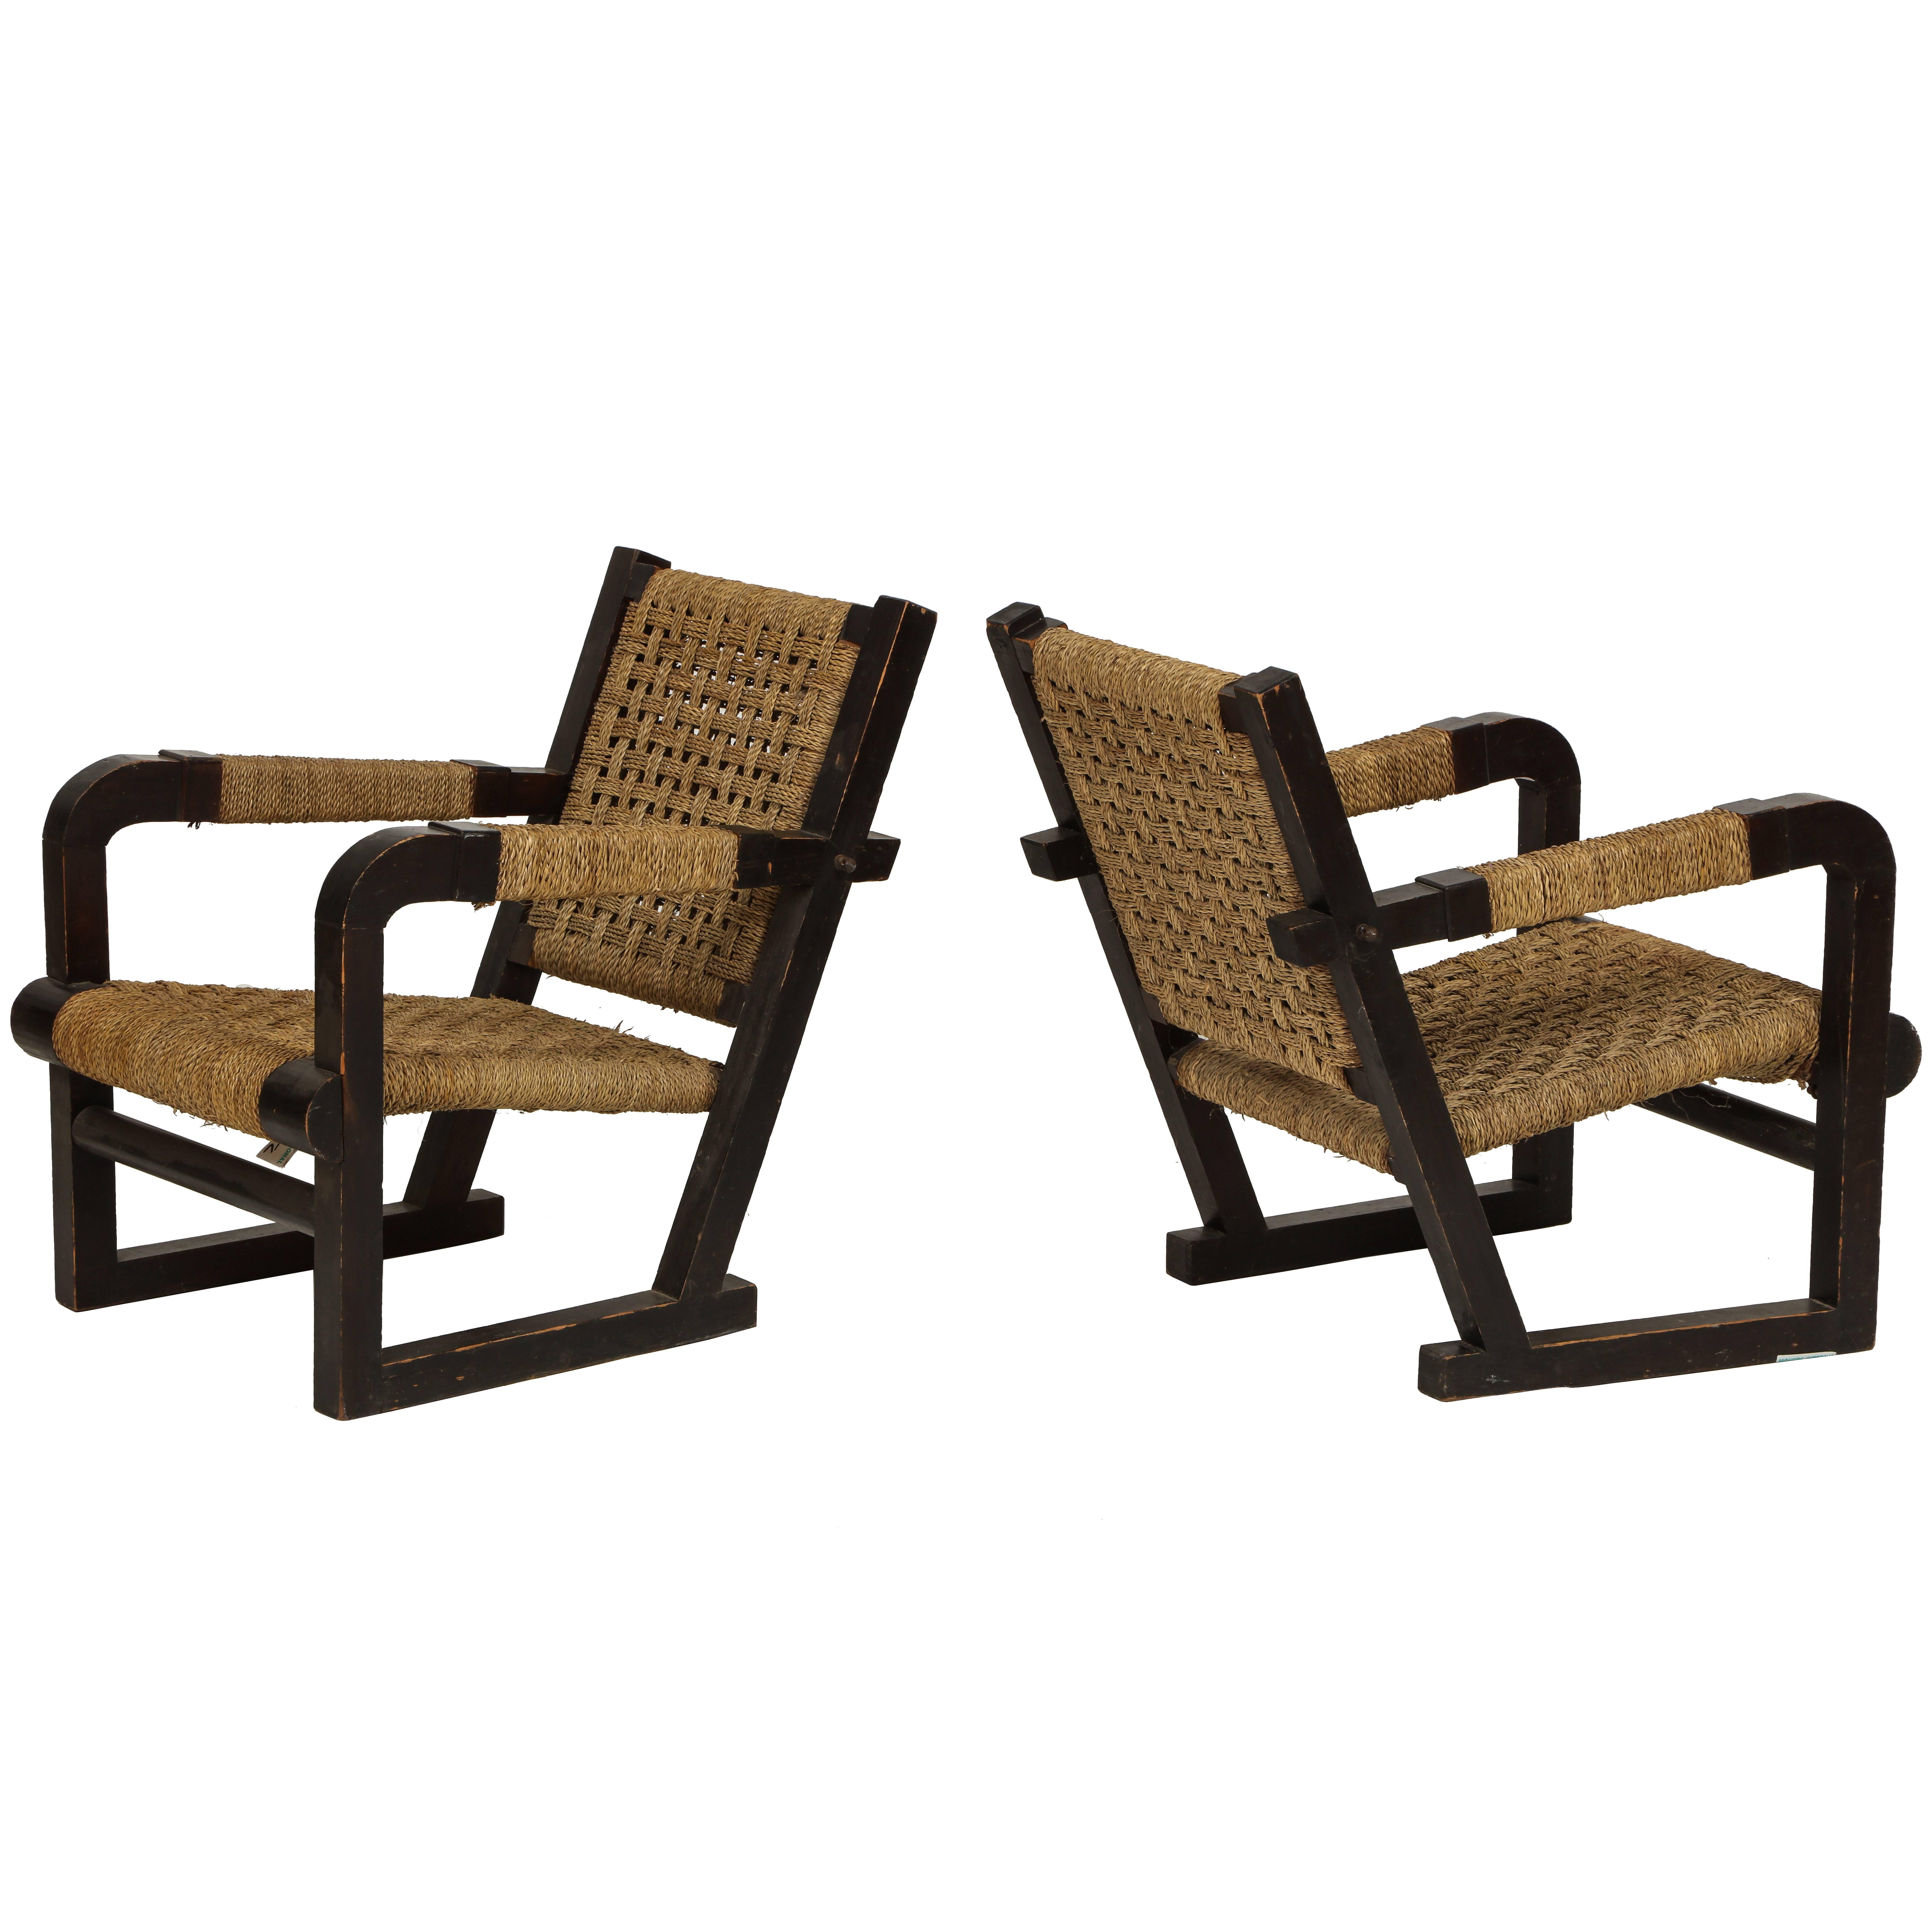 Francis Jourdain Attributed Oak Woven Lounge Chairs, French Deco, 1930s